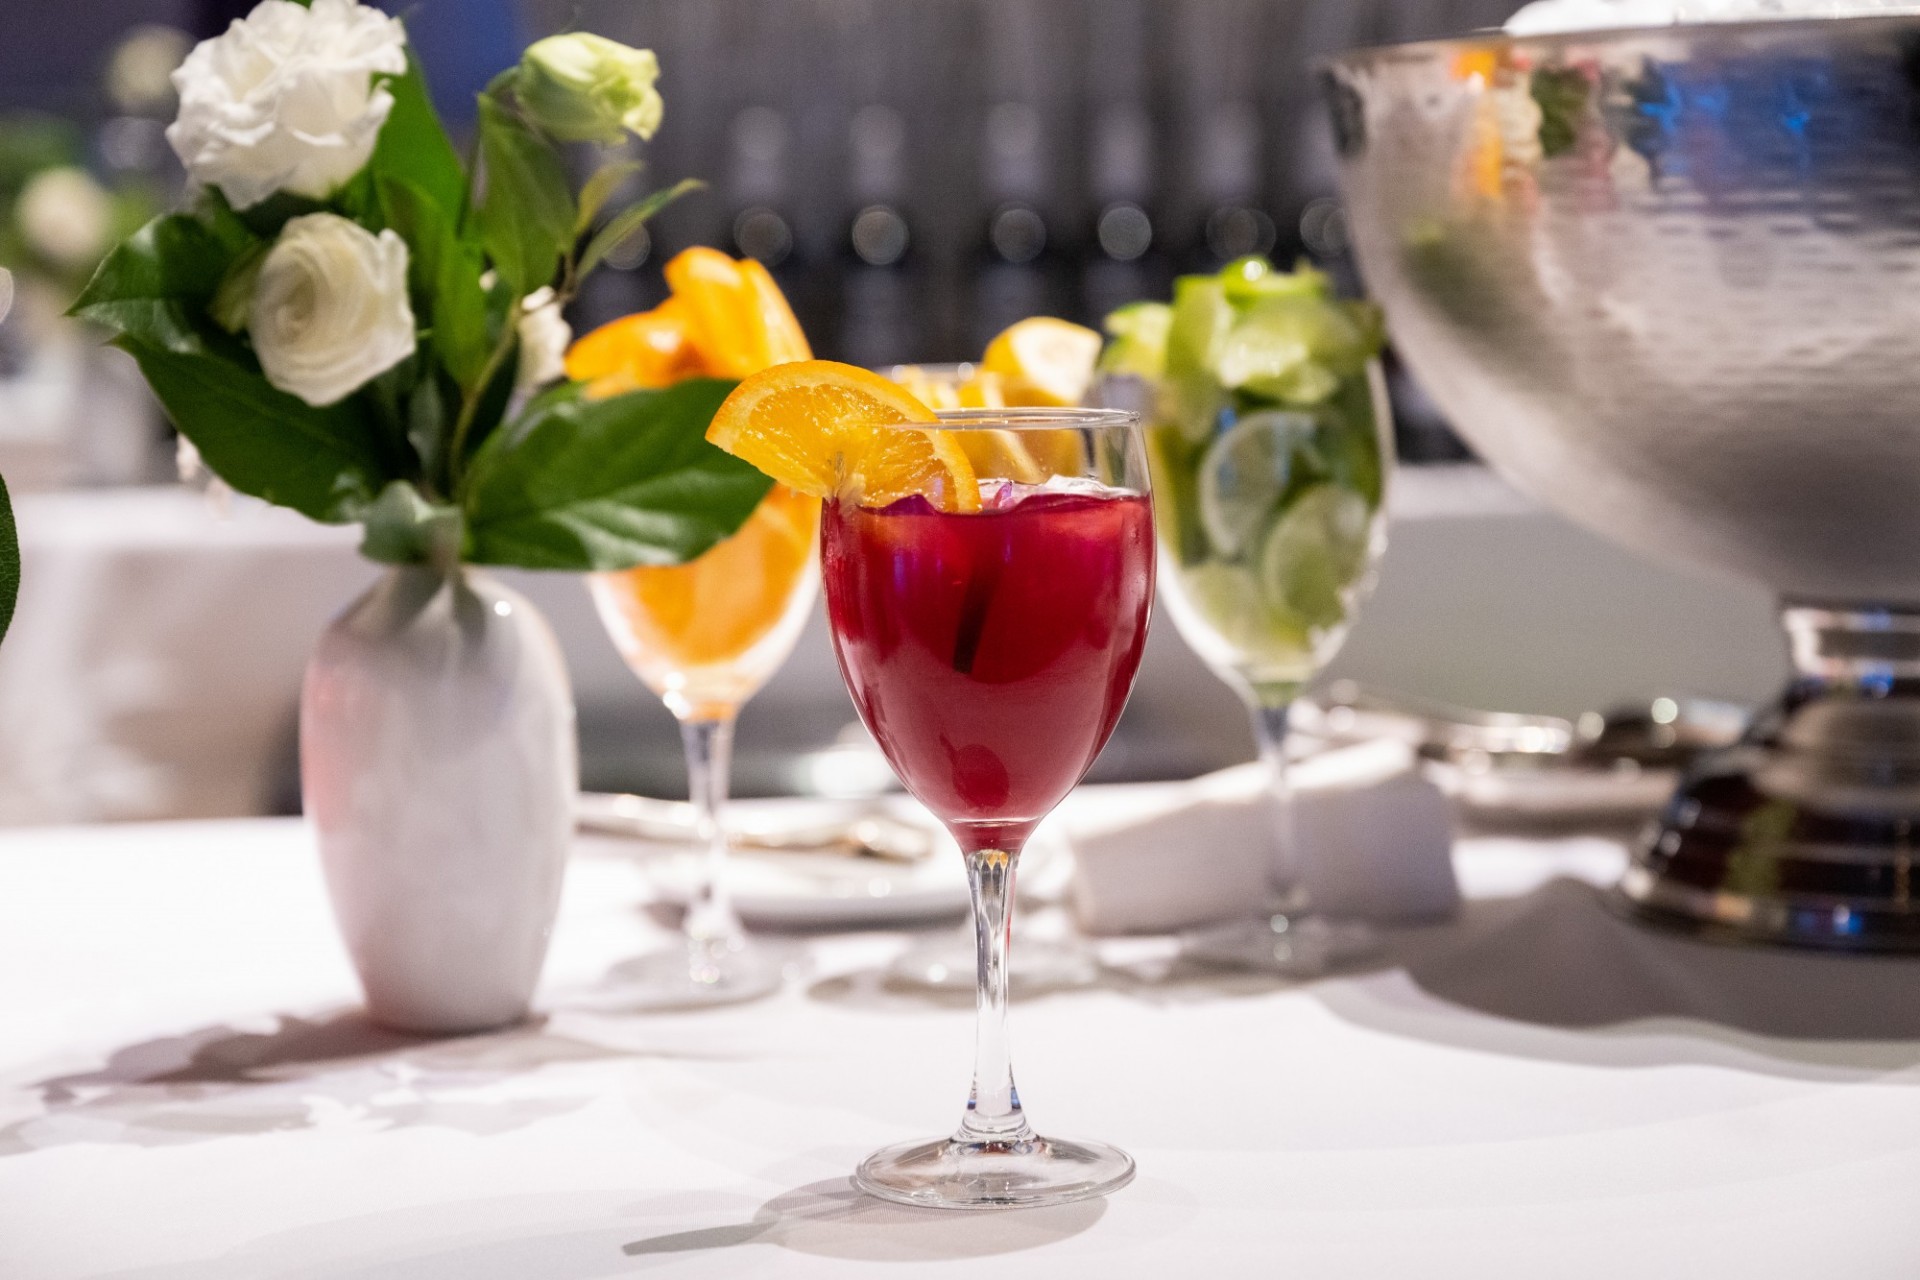 A red cocktail with an orange slice on the rim sits on a white table with a bouquet of white flowers in the background